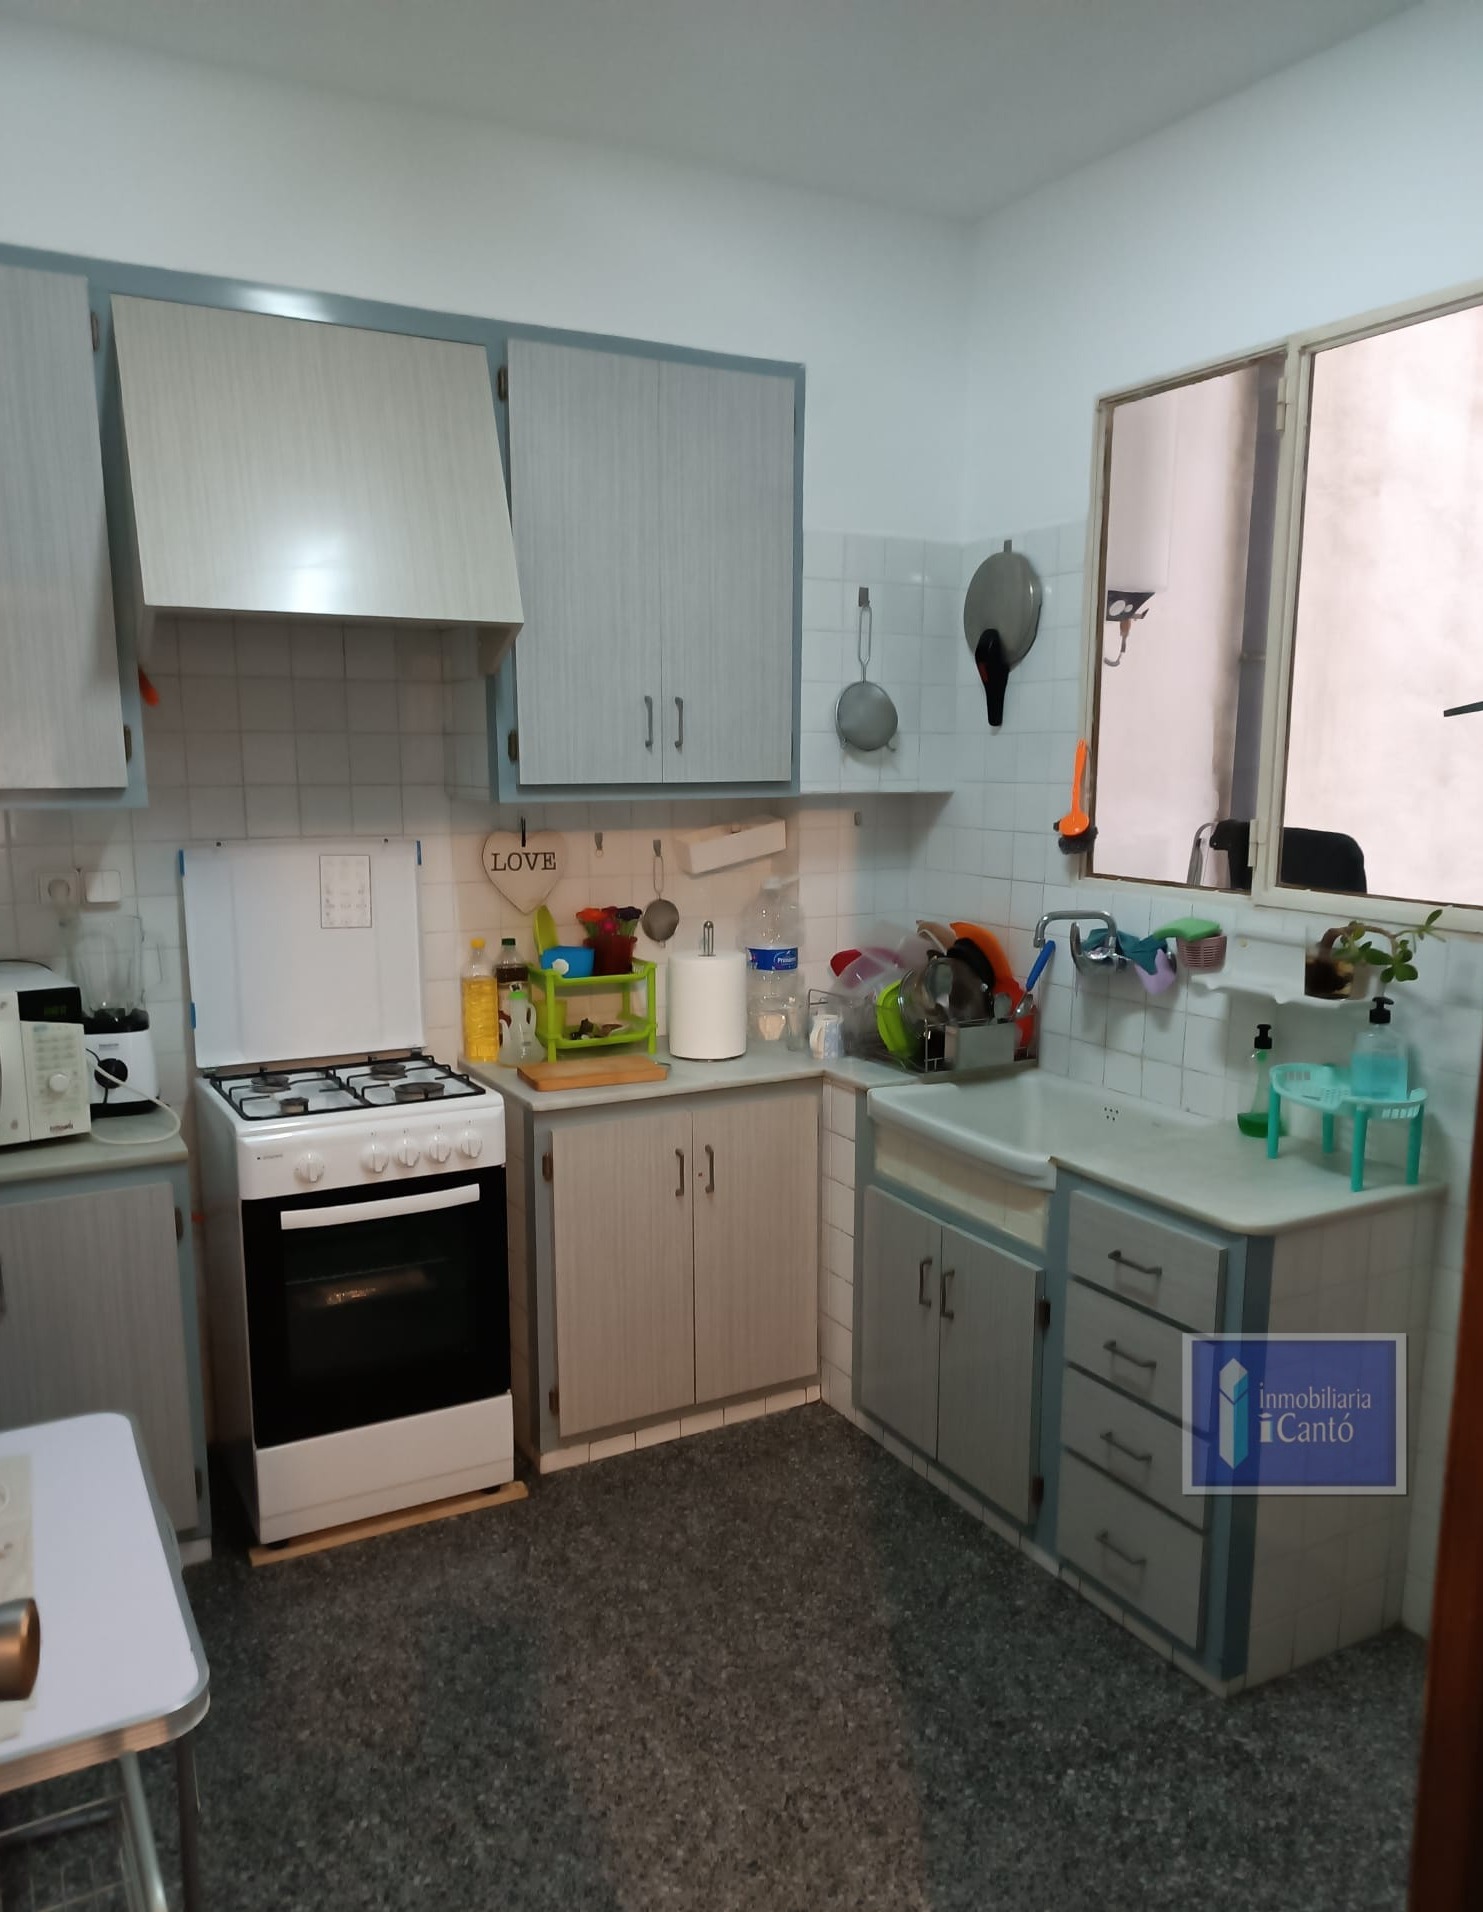 Apartment For Sale in the Centre of Alcoy